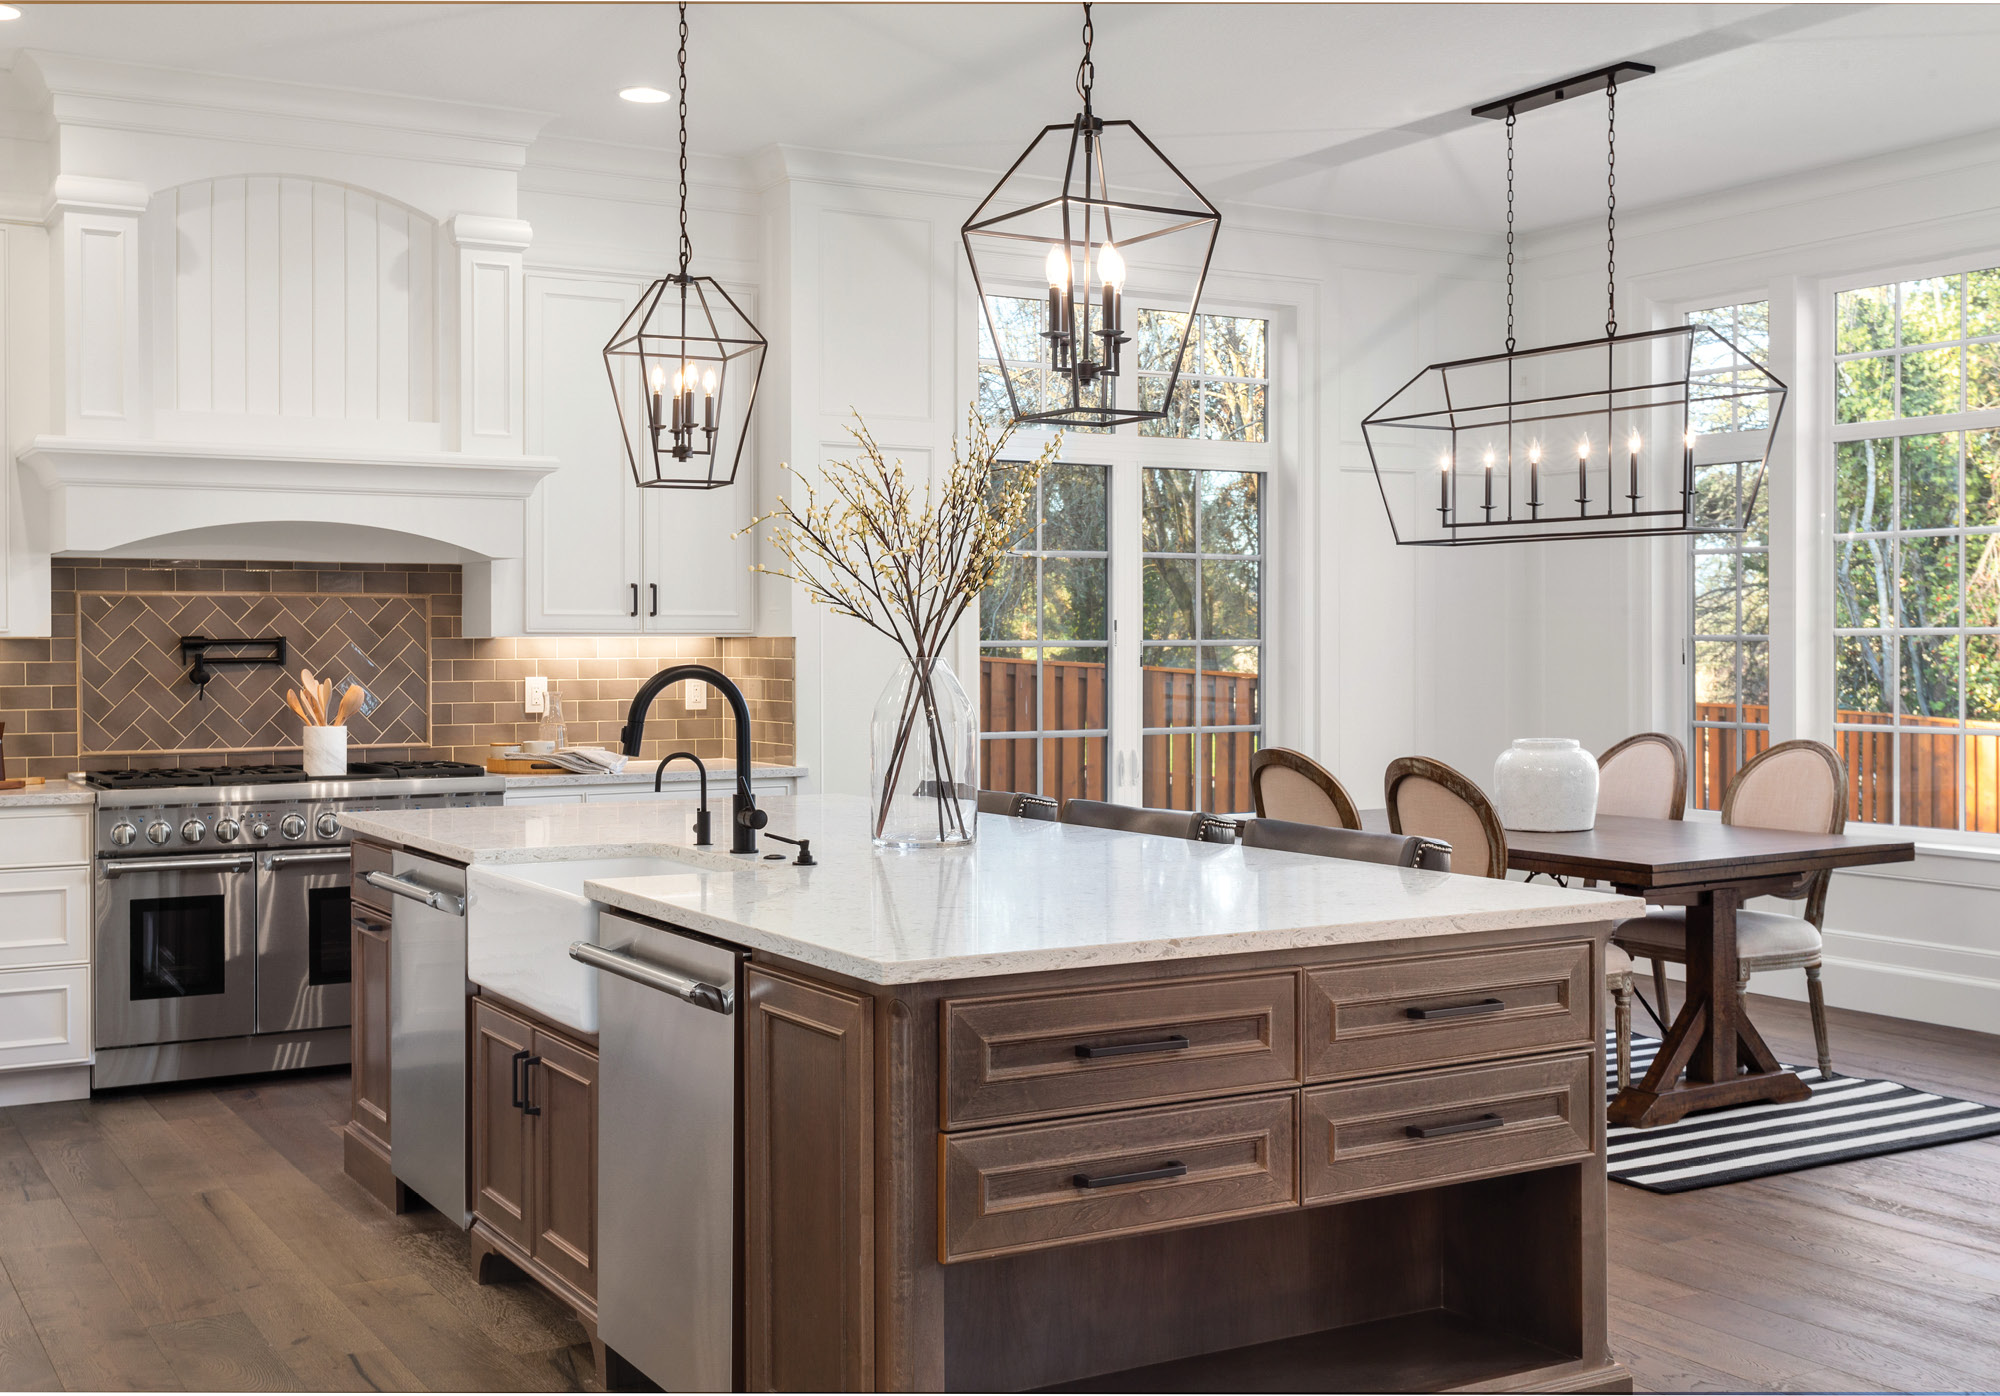 How To Add Style To A Kitchen Island